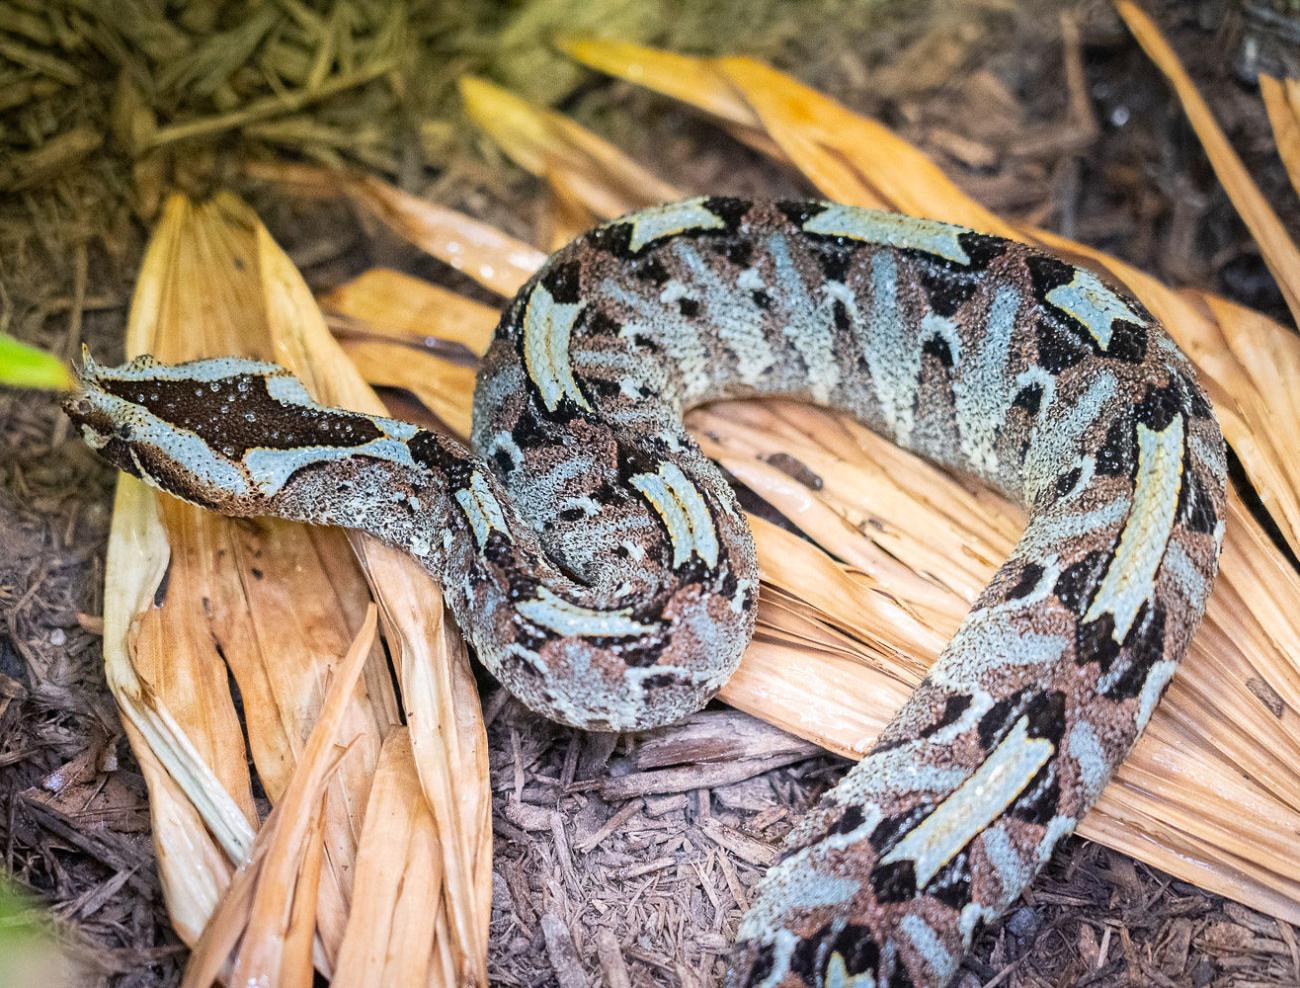 🐍 Snake Quiz: Can you identify all 20 snakes? - A-Z Animals